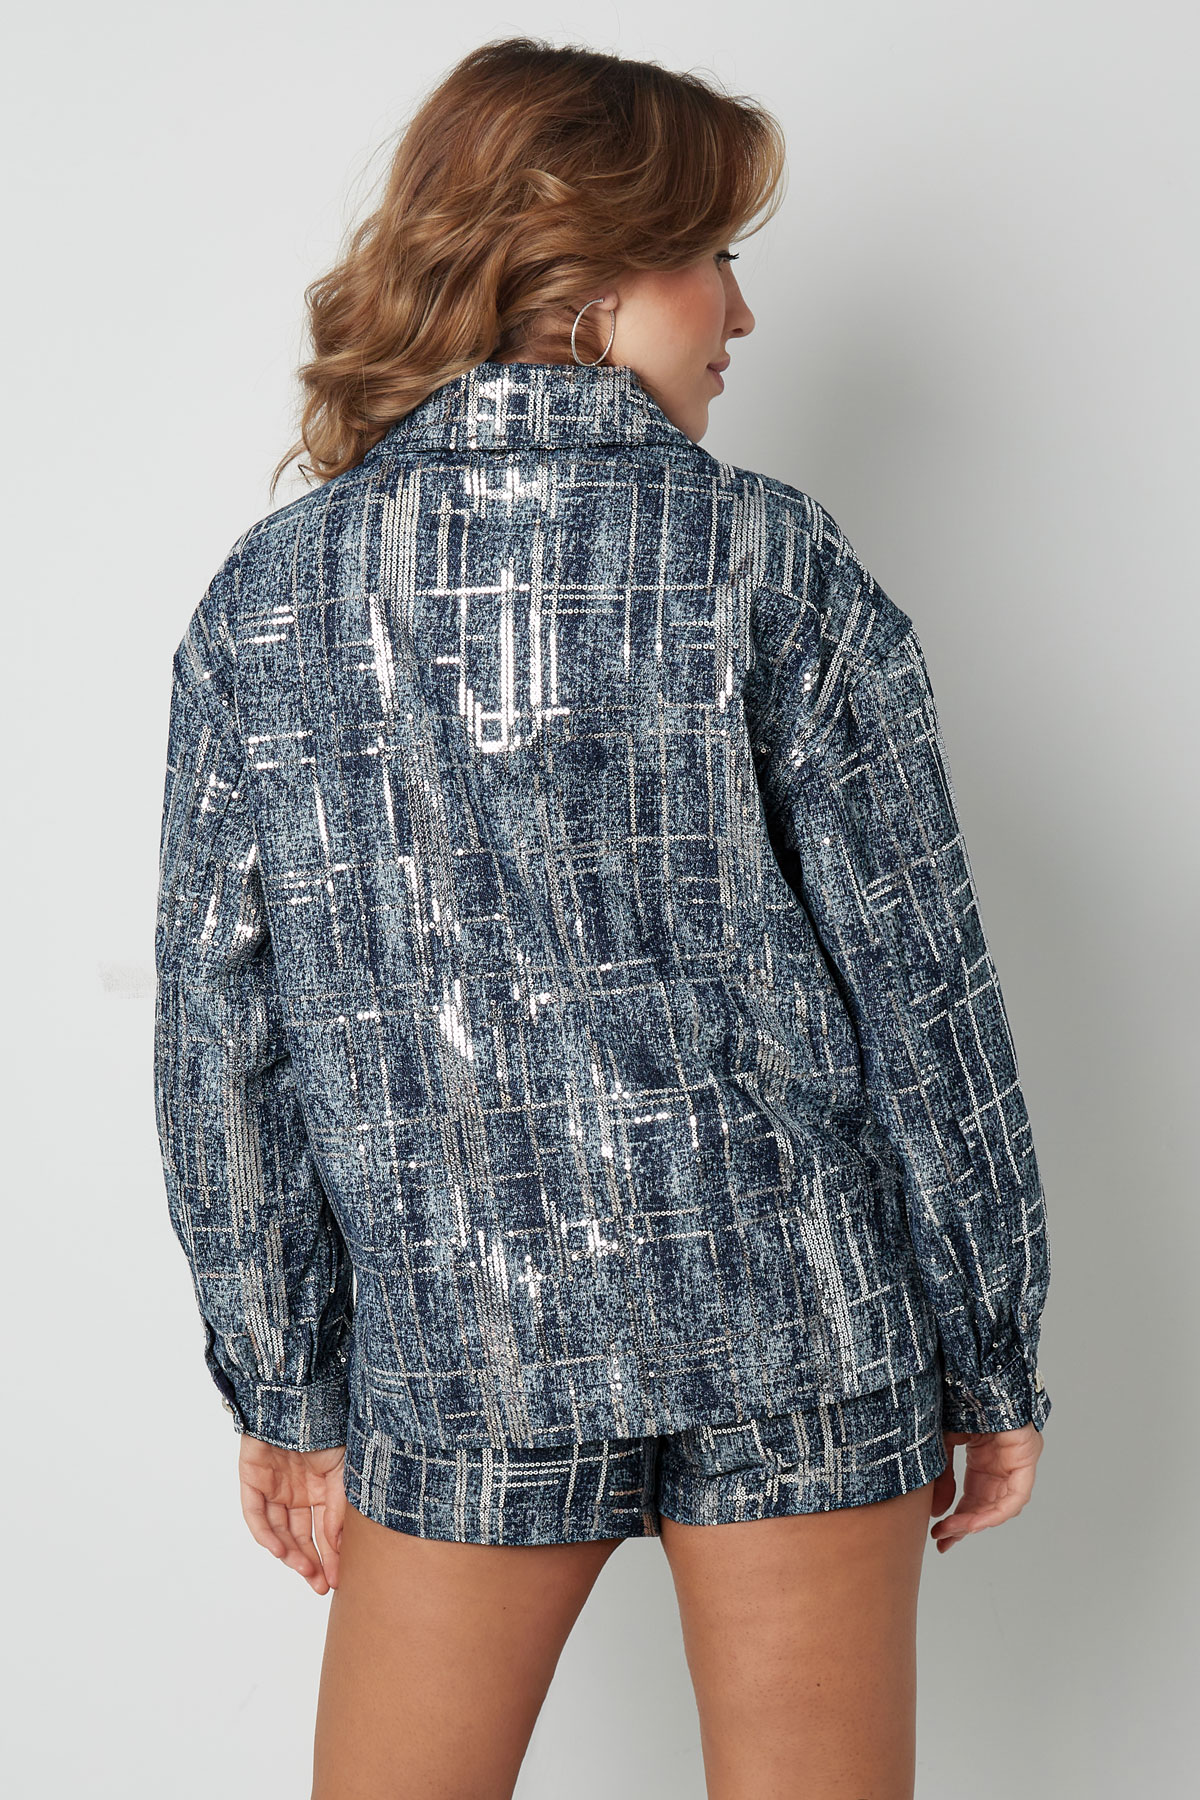 Jacket denim look with sequins - blue - S Picture11